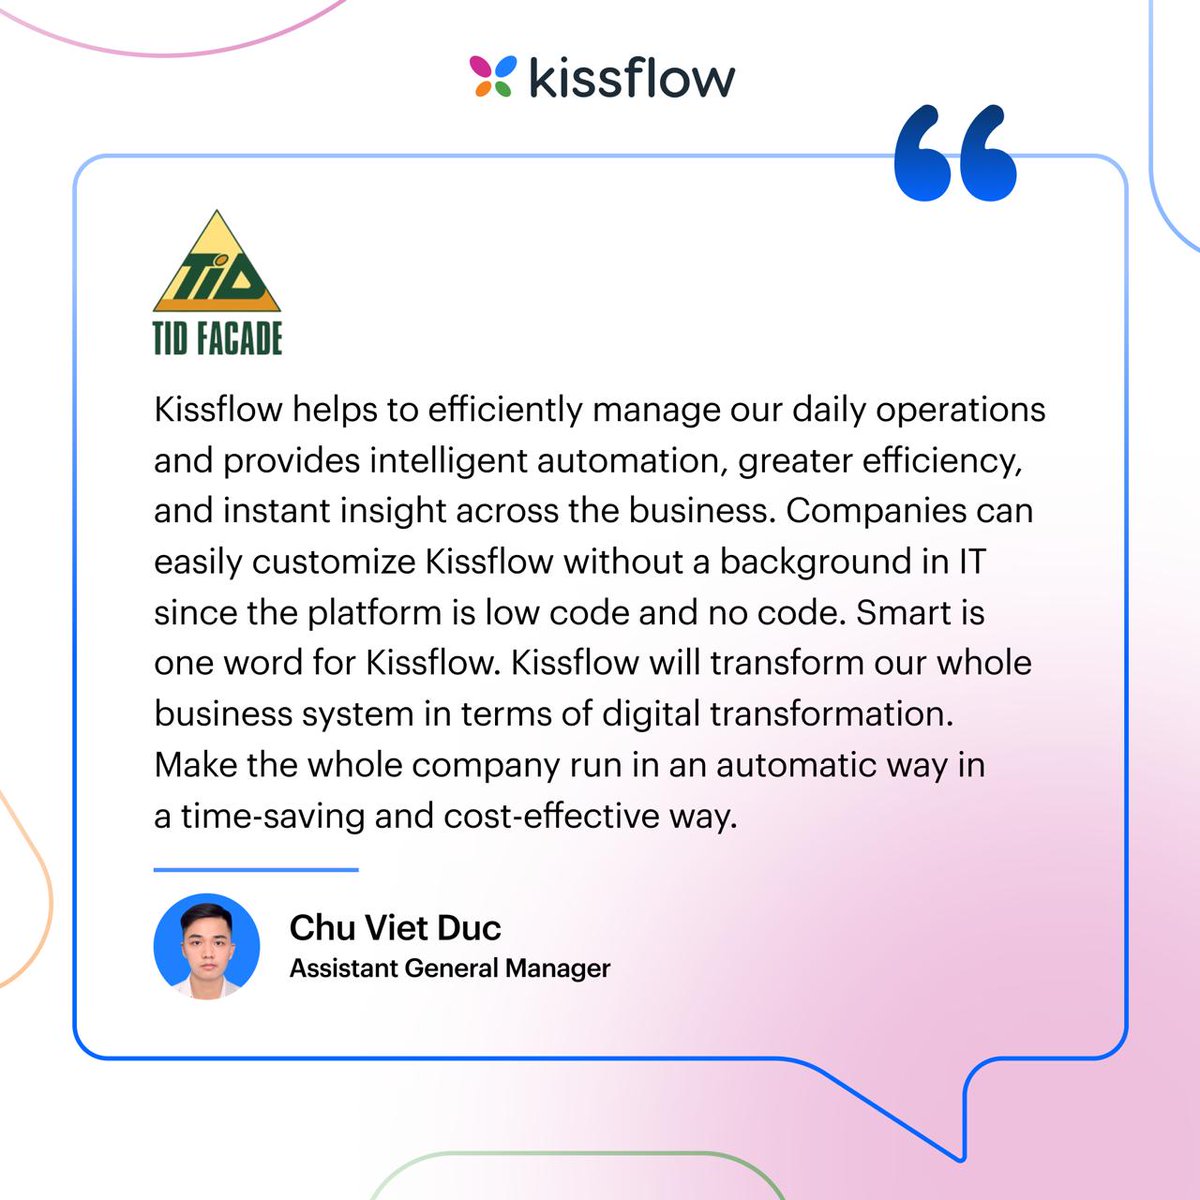 🌟 Thrilled to share this glowing testimonial from one of our amazing customers! 🌟
#HappyCustomers #TestimonialTuesday #CustomerSatisfaction #TransformativeTech #DigitalTransformation